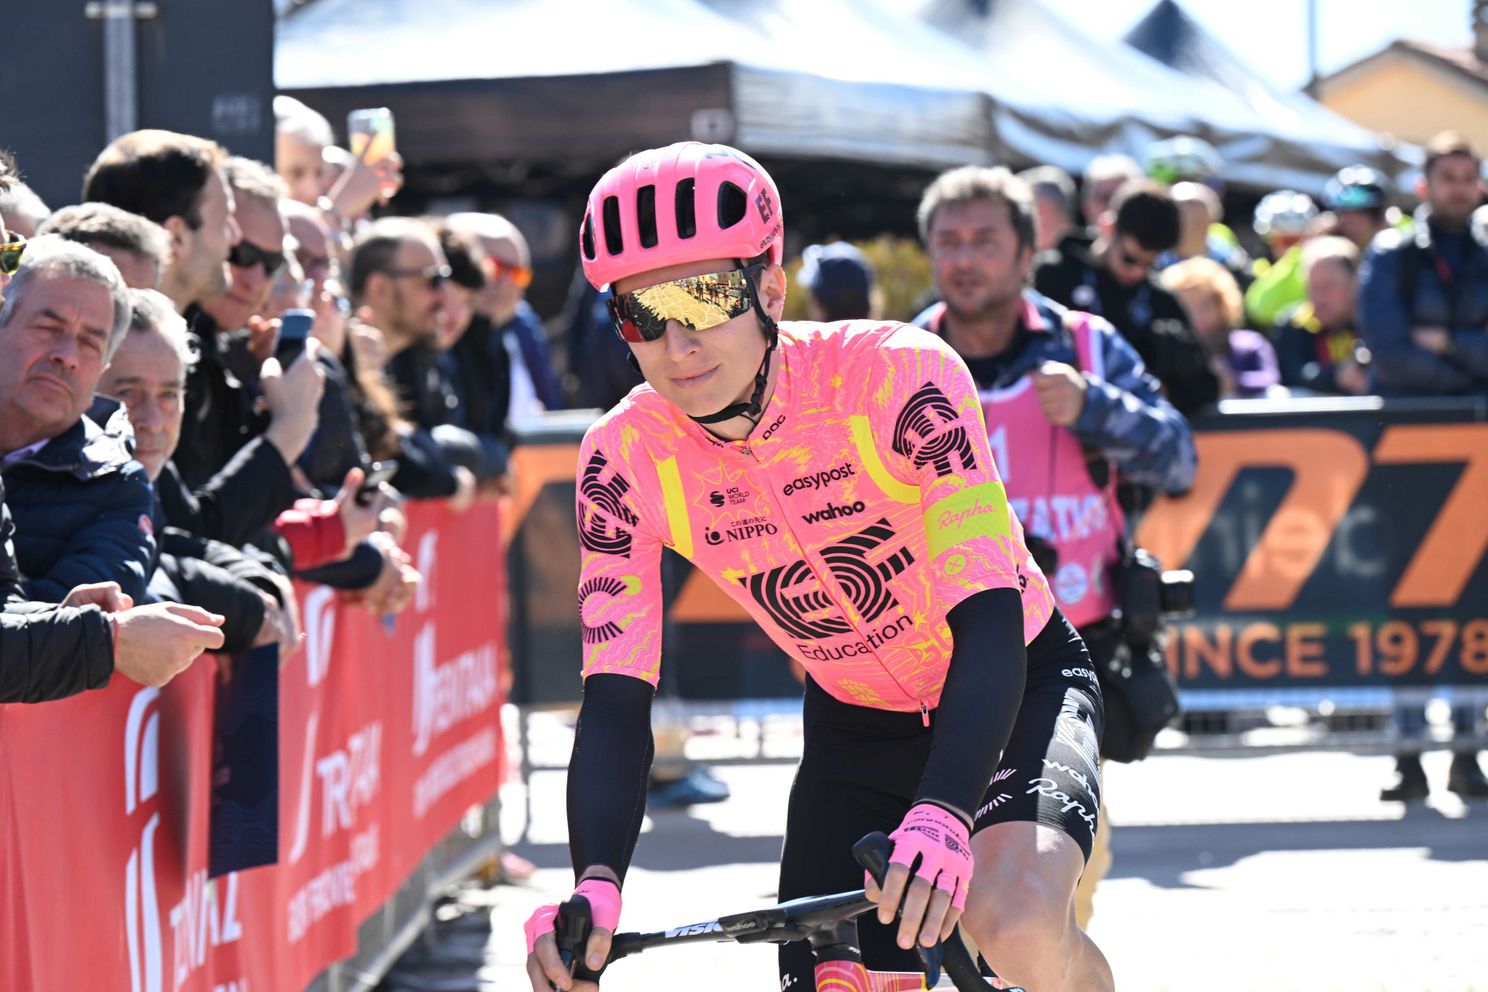 From "I think I can win" to DNS for Powless; EF will compete with Bettiol and Van den Berg in Milan-San Remo